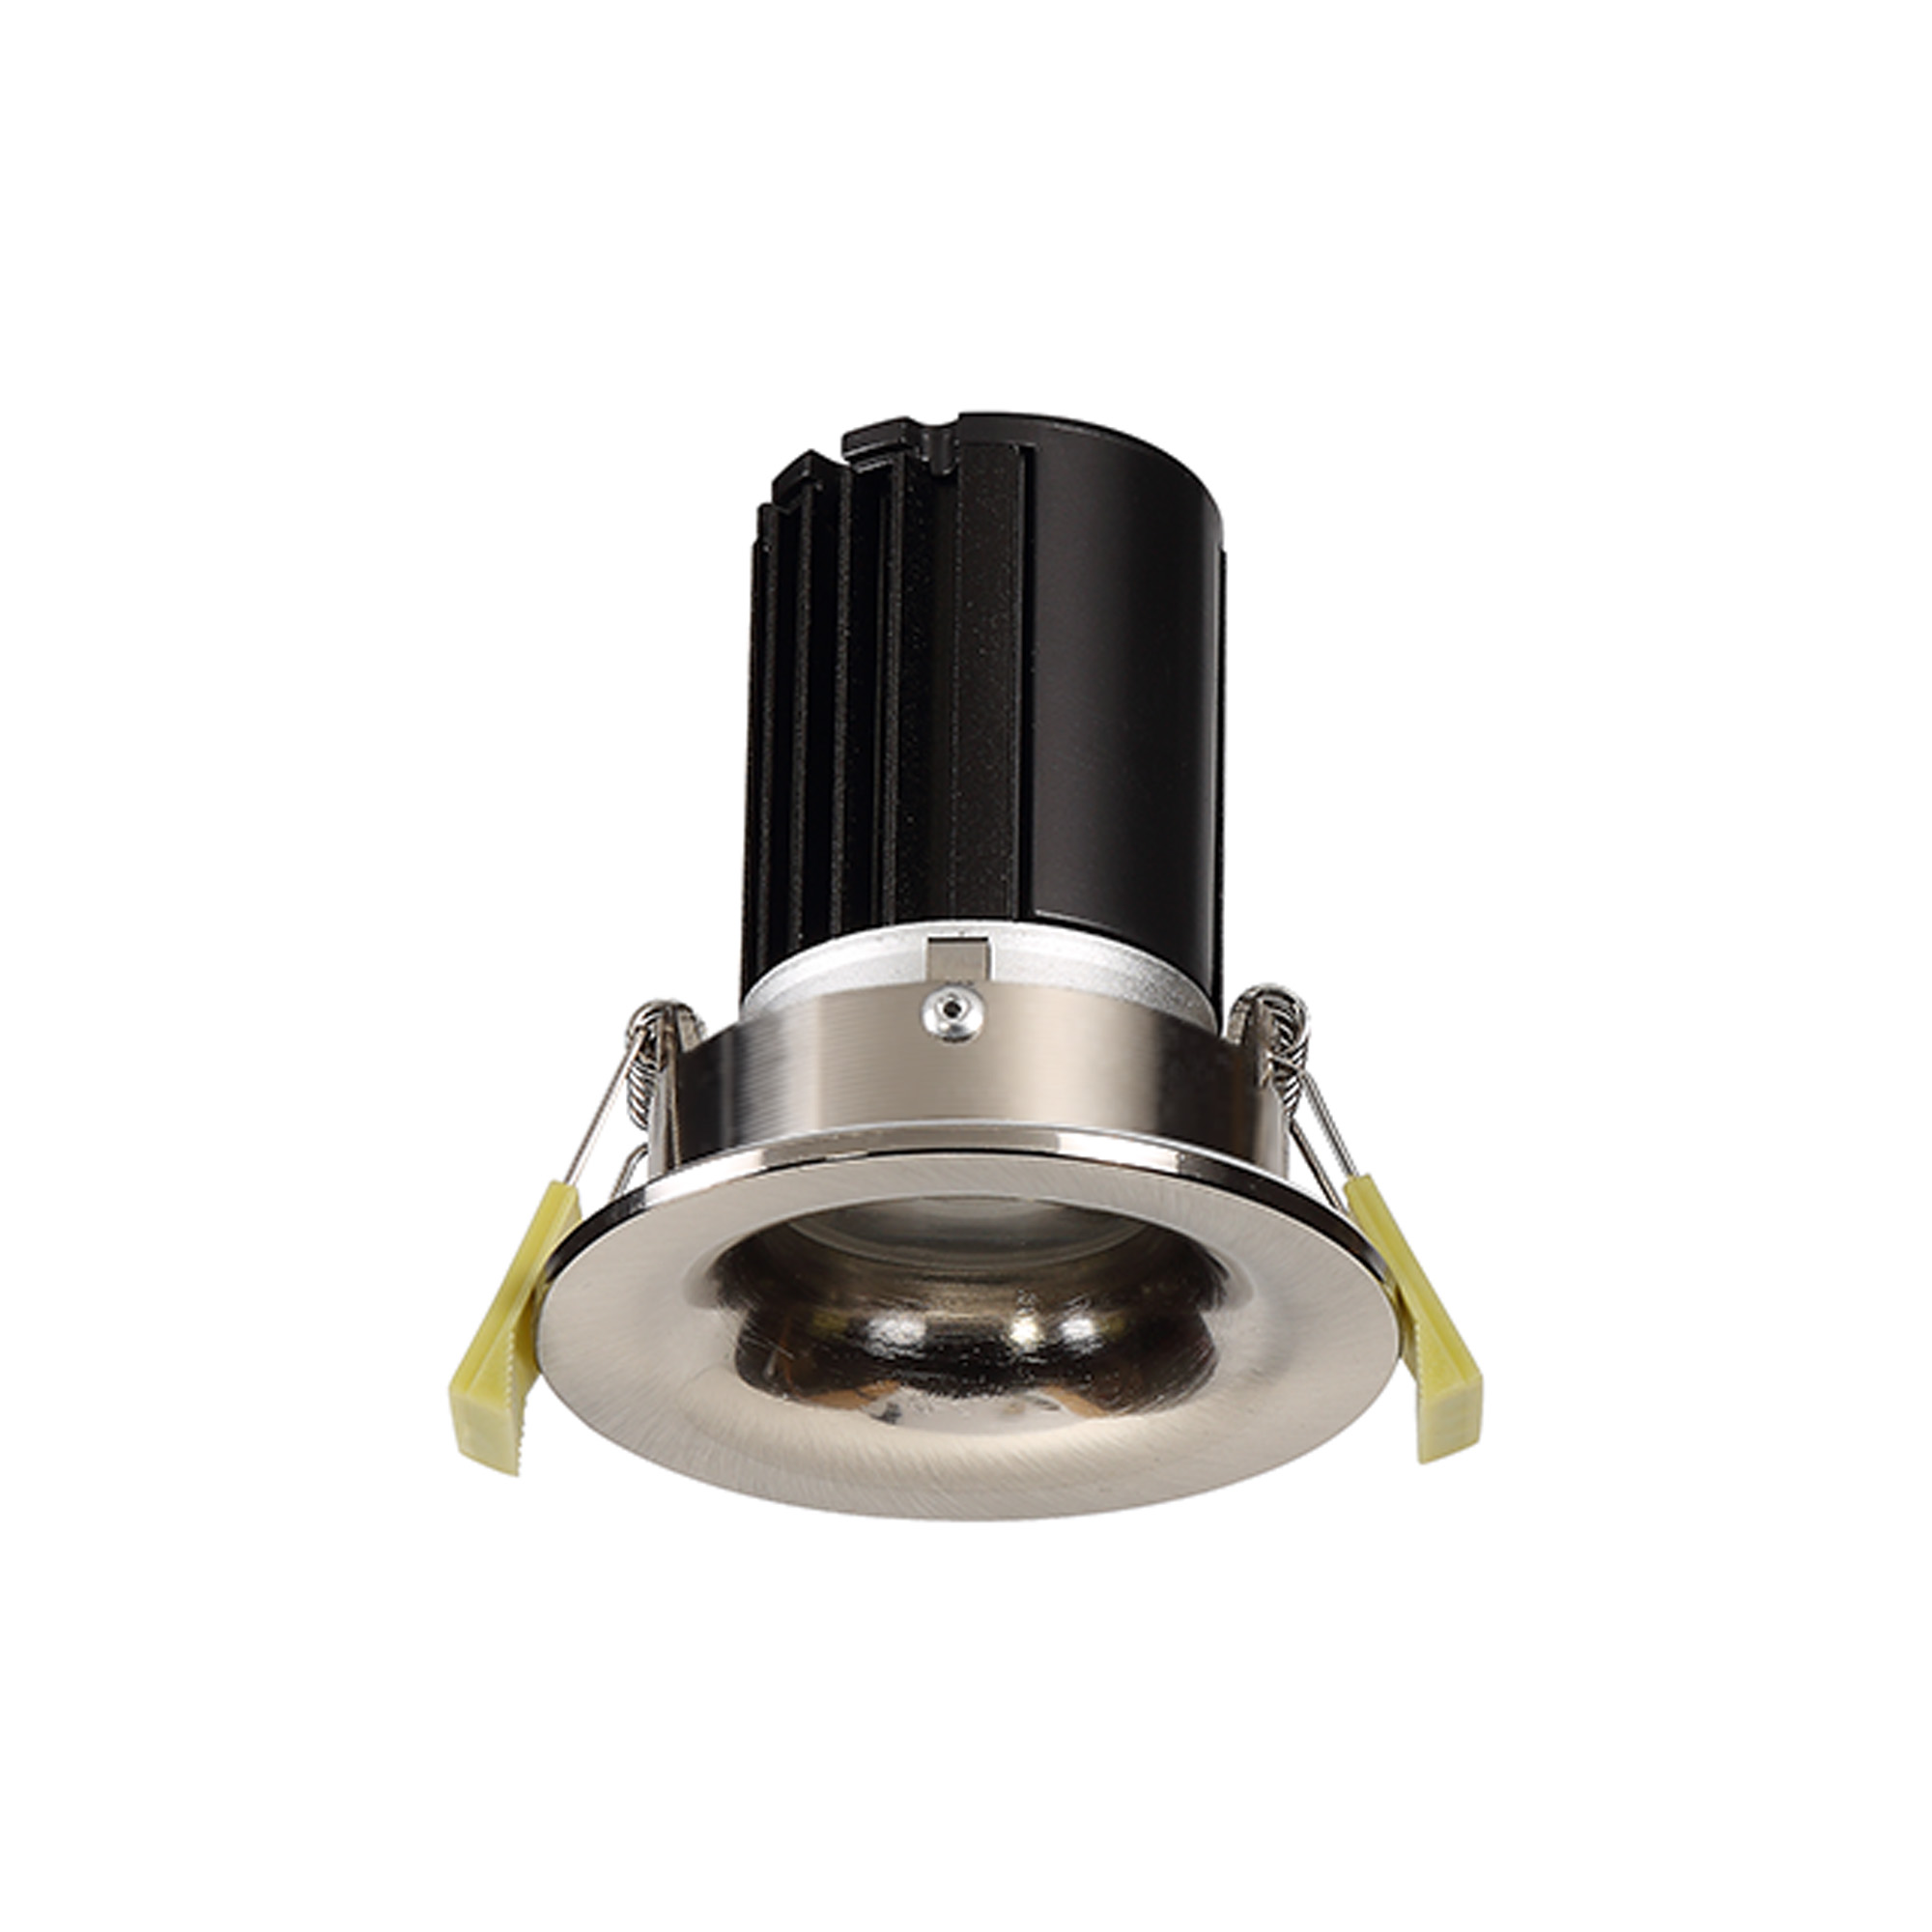 DM202495  Bruve 12 Tridonic powered 12W 3000K 1200lm 36° LED Engine,300mA , CRI>90 LED Engine Satin Nickel Fixed Round Recessed Downlight, Inner Glass cover, IP65